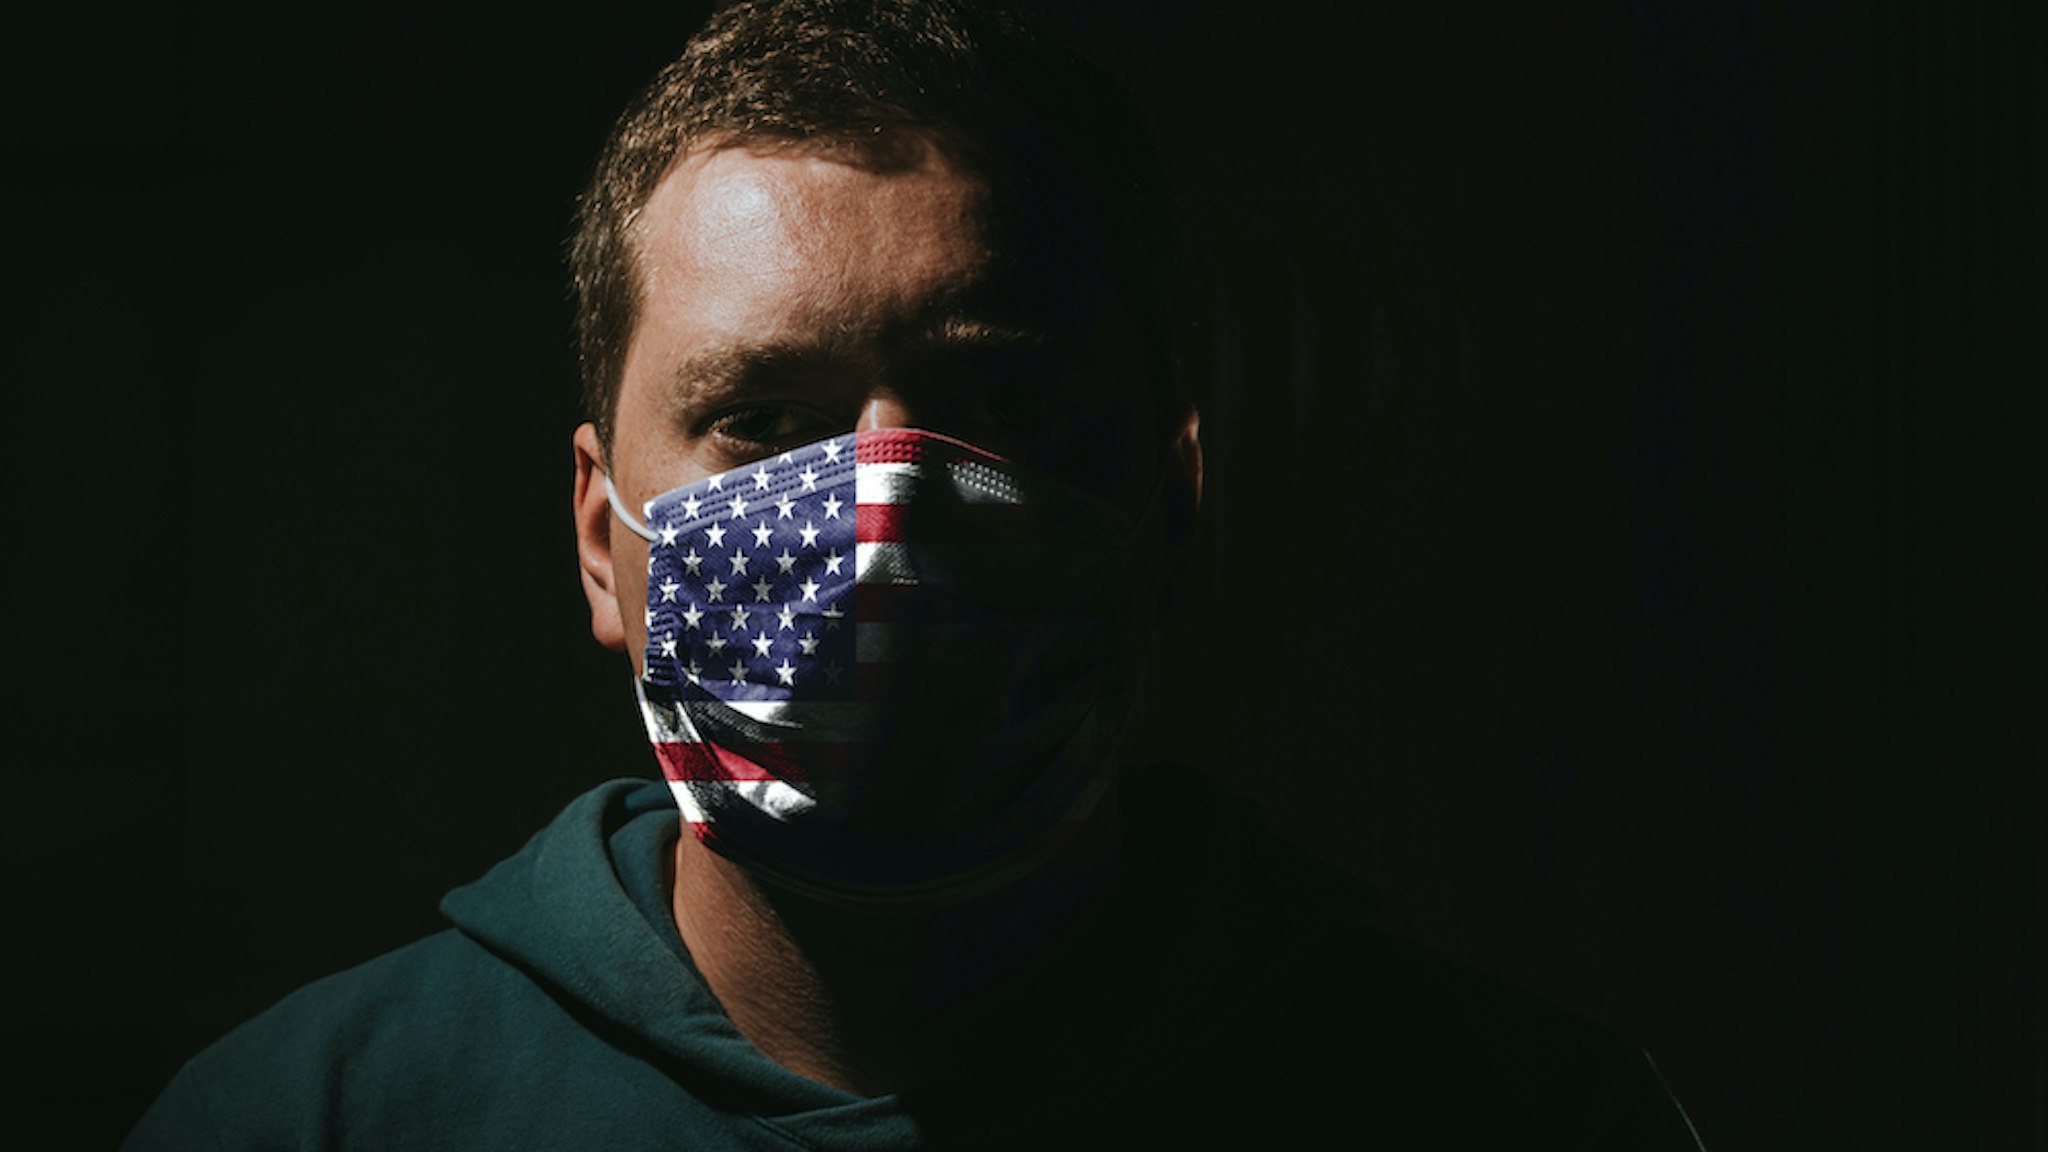 Man Wearing Mask With American Flag For Protection Of Corona Virus Covid-19 Sars-Cov-2